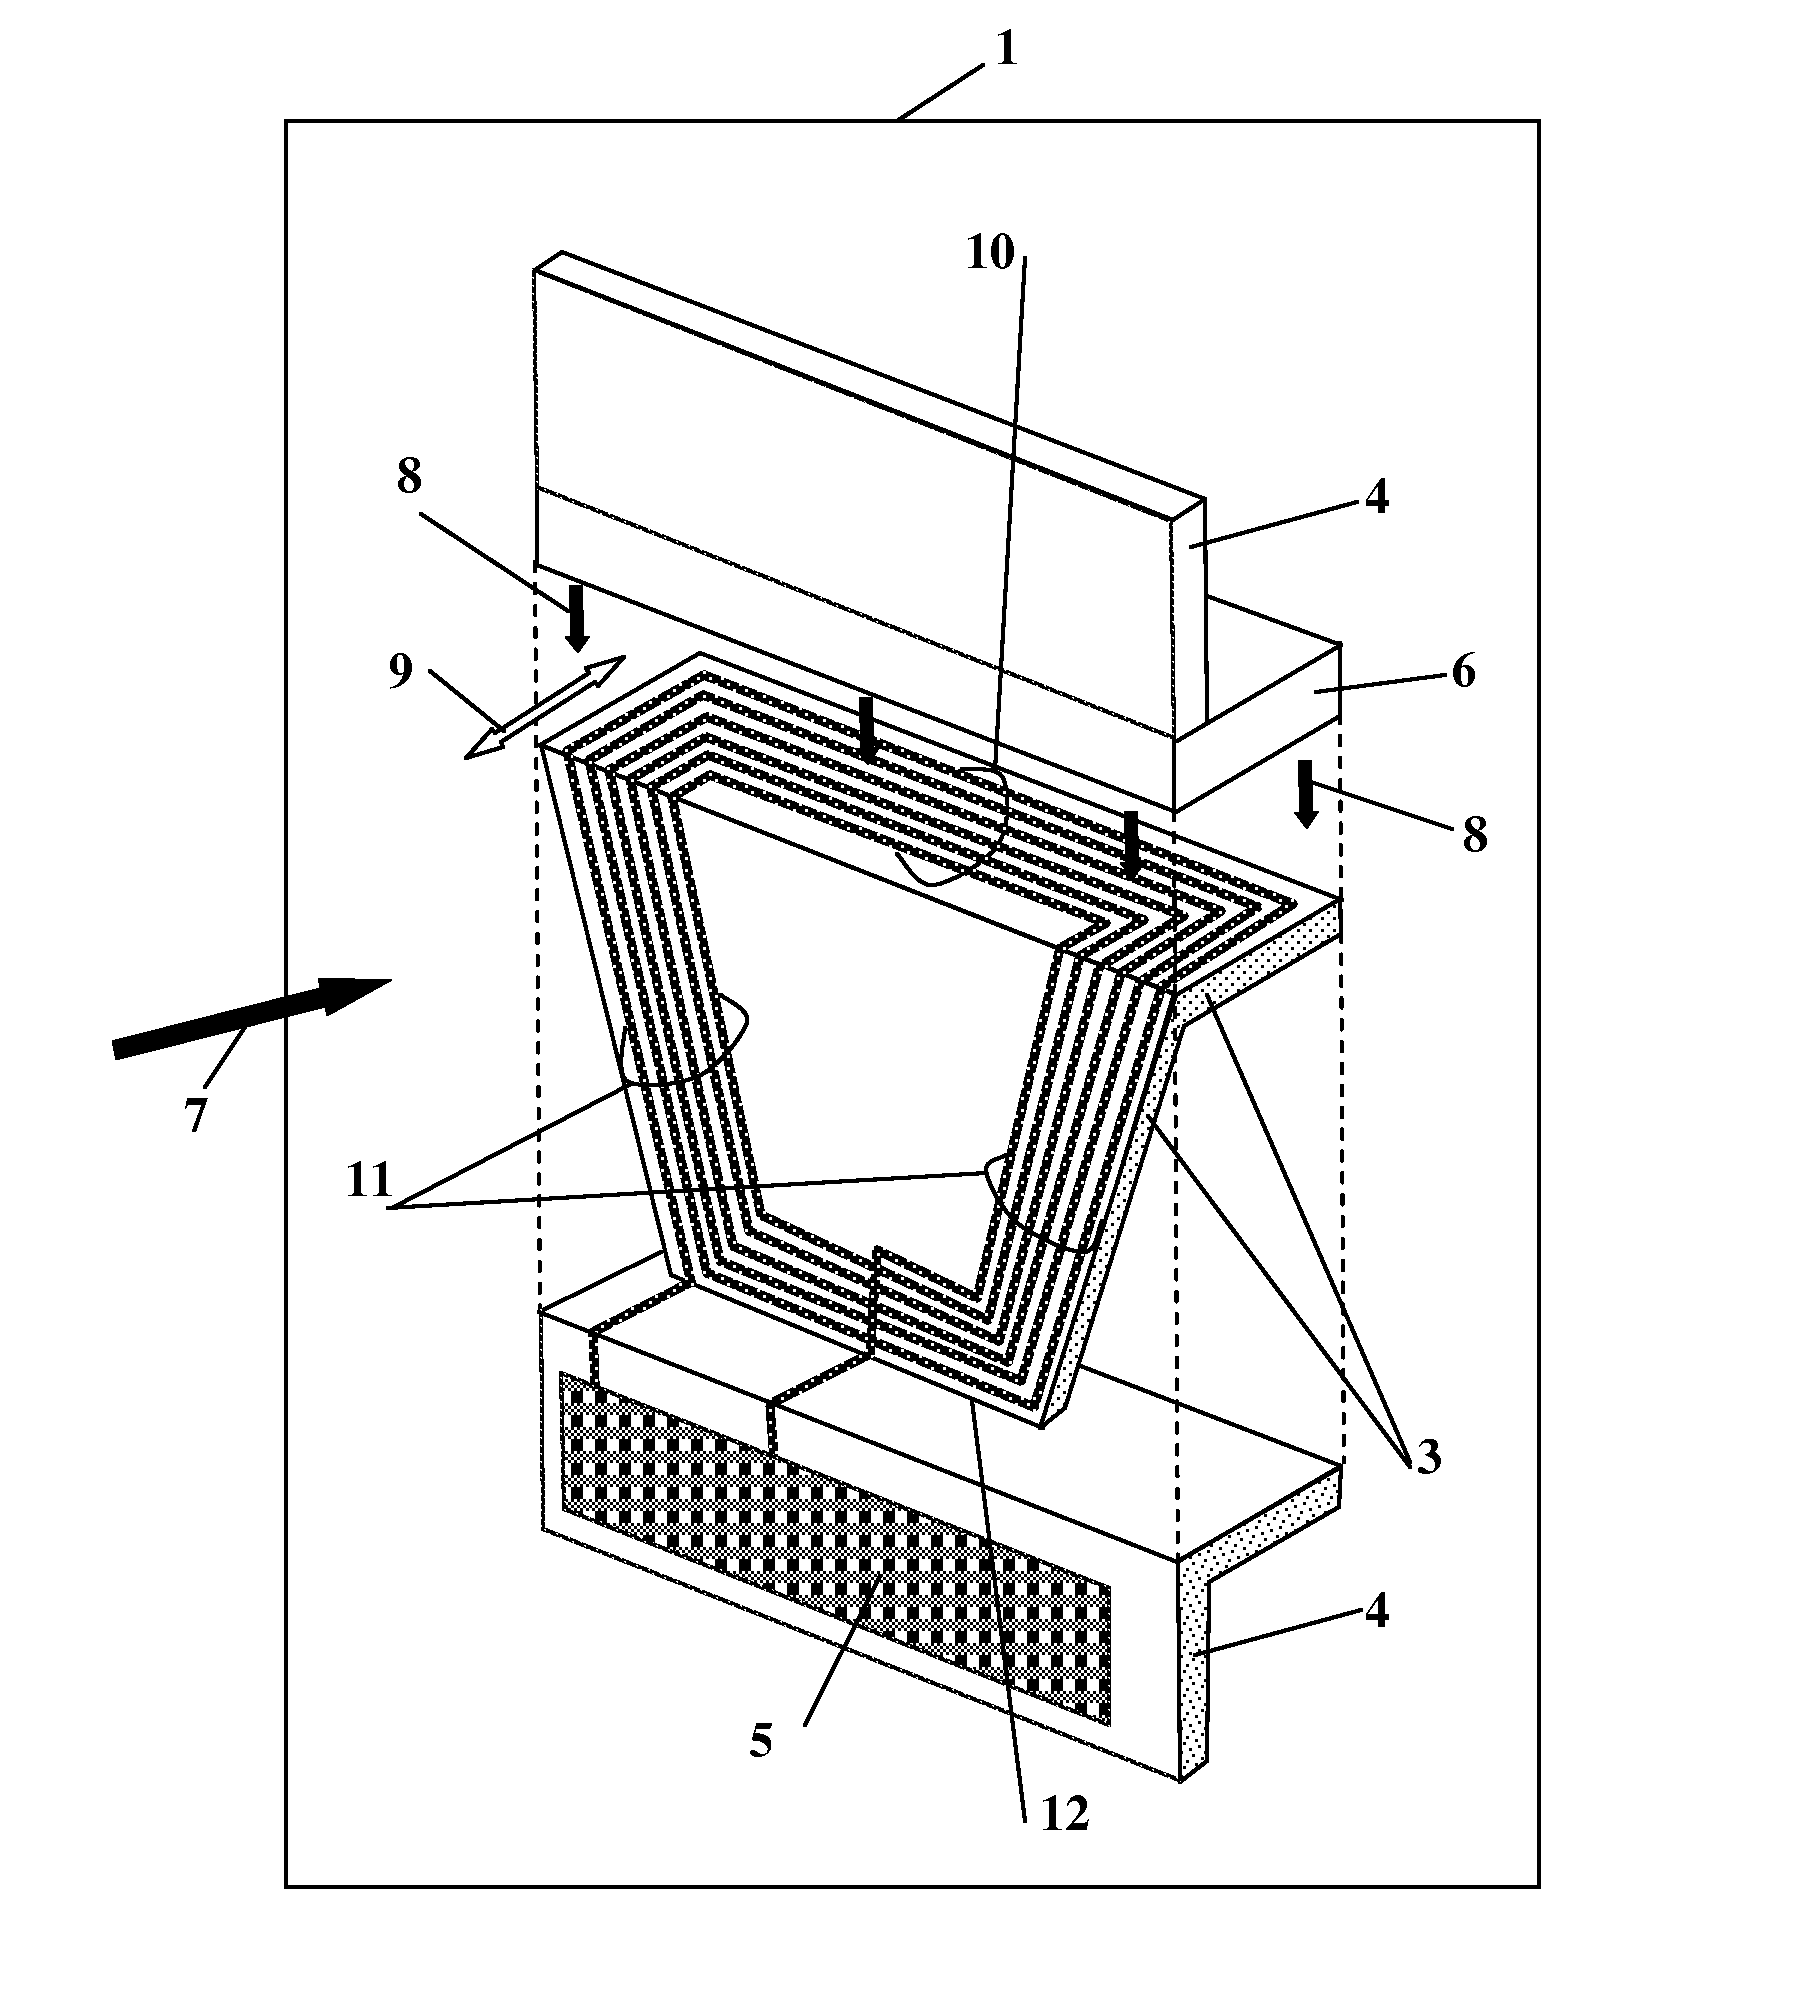 Device and method for harvesting energy from flow-induced oscillations